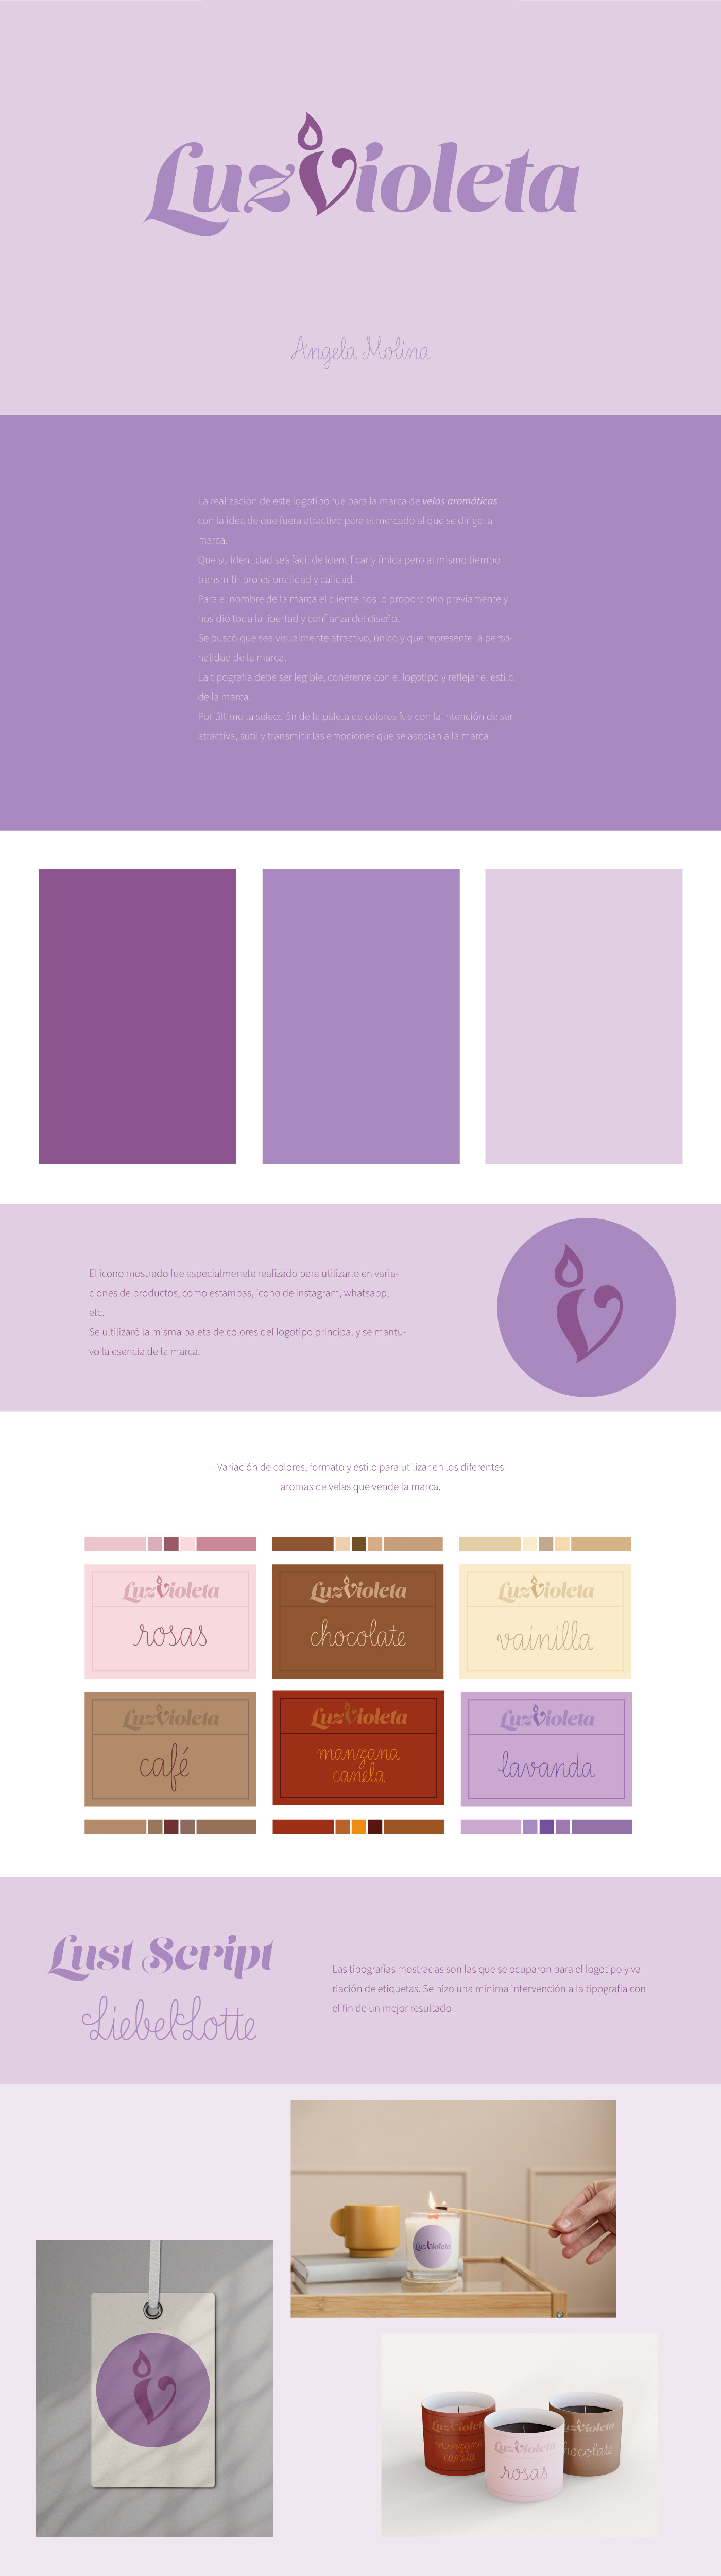 text Graphic Designer brand identity marketing   candles packaging design